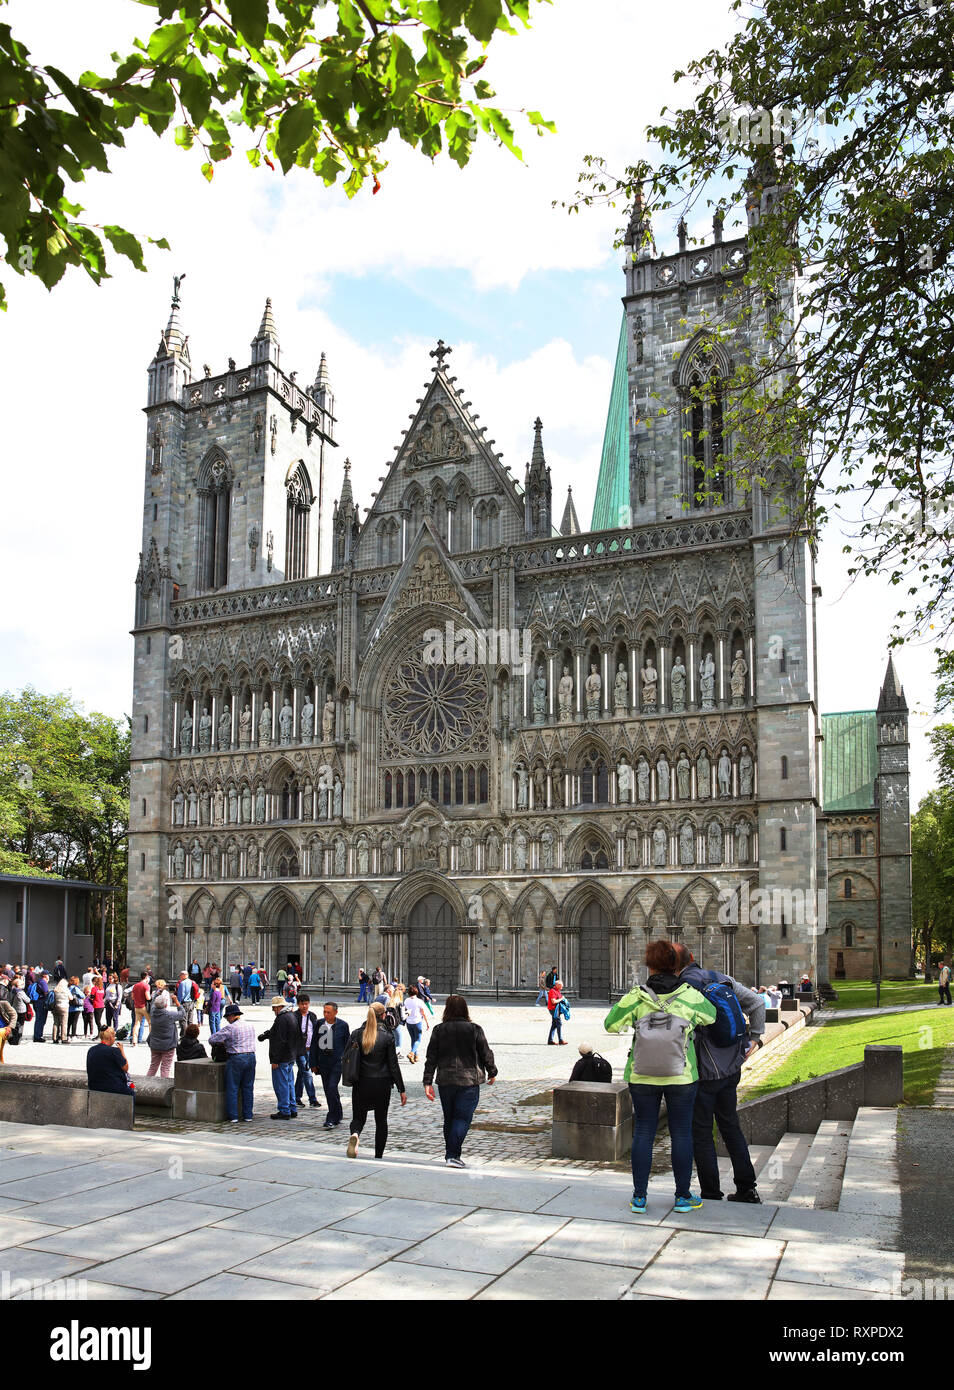 Built from 1070 in Gothic style of architecture, the Nidaros Cathedral (Nidaros Domkirke) is located in heart of Trondheim, Norway Stock Photo